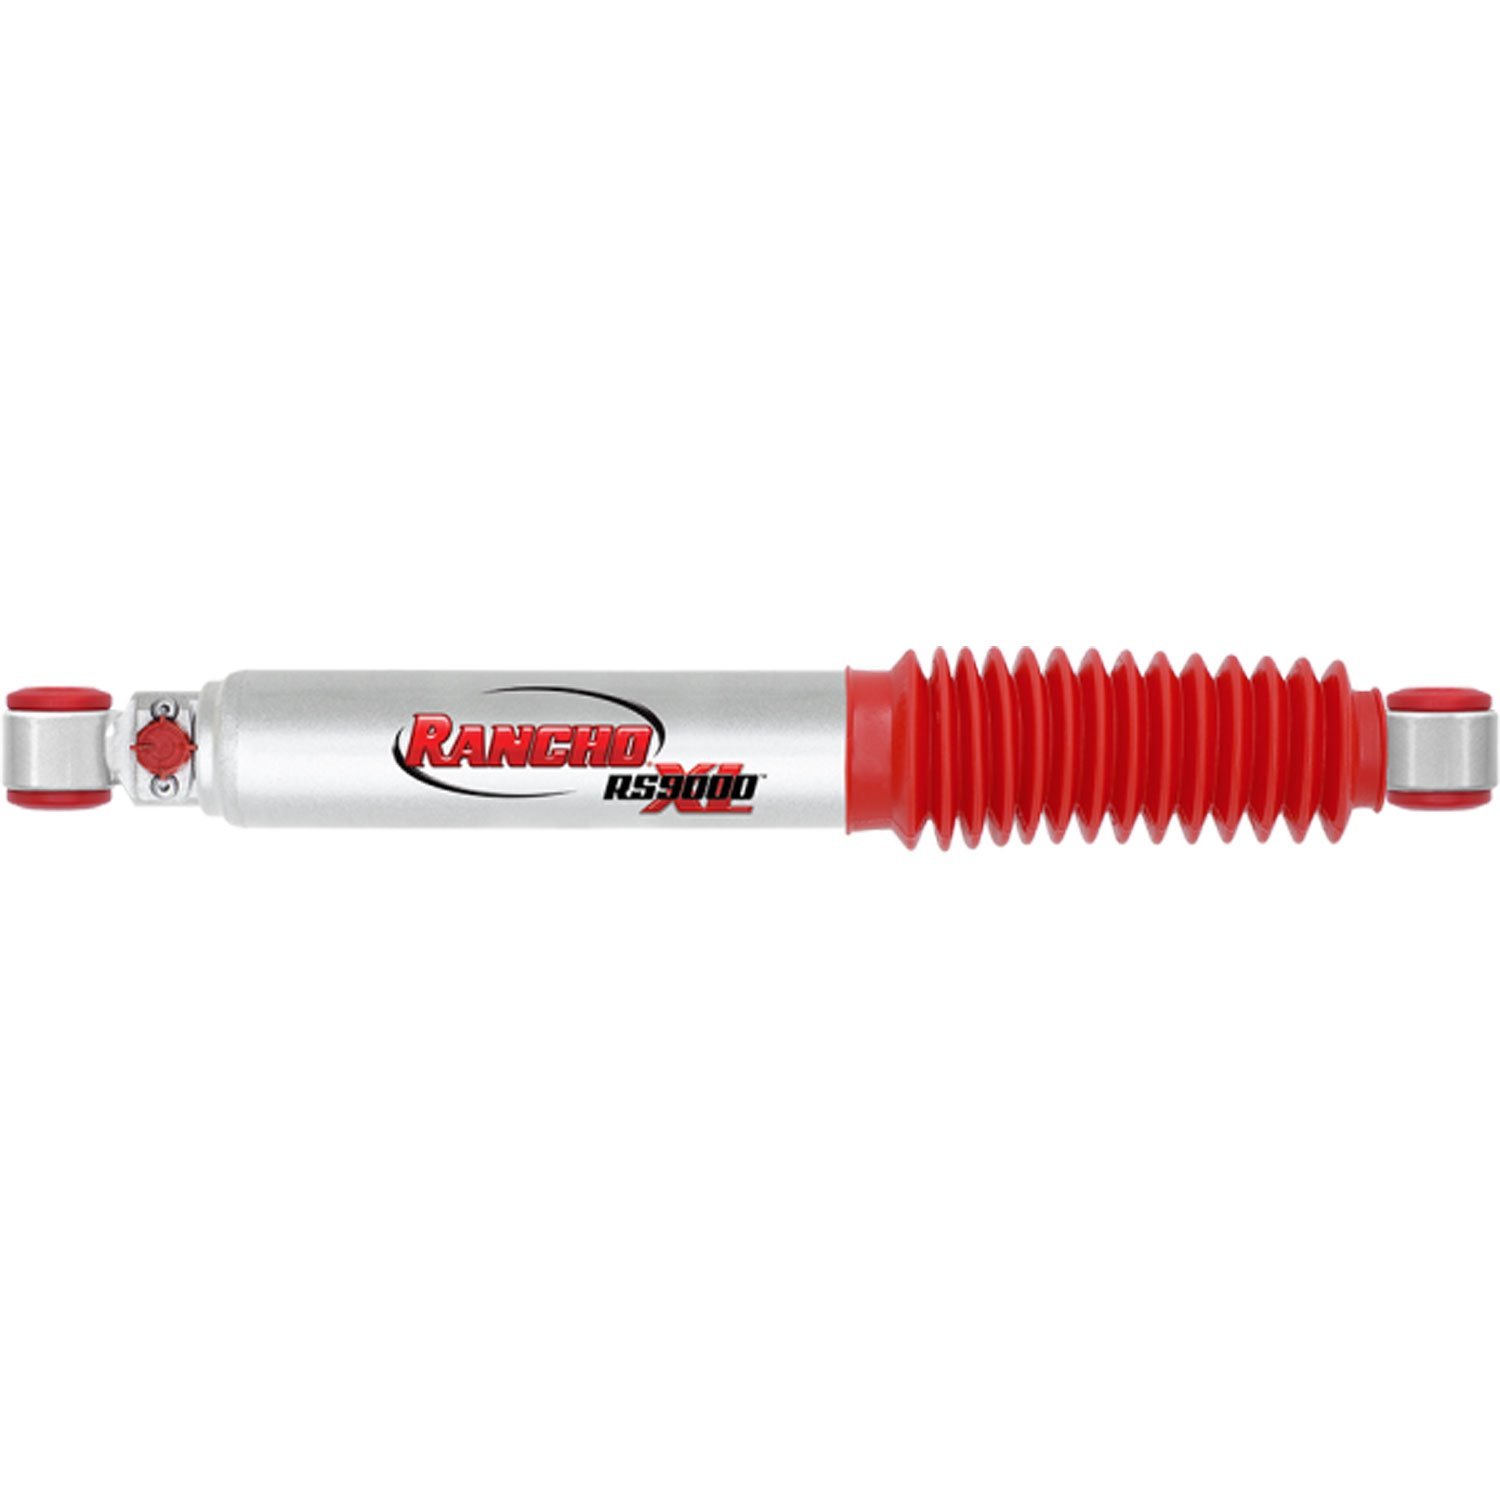 RS9000XL Rear Shock Absorber Fits Toyota 4Runner, Pickup and Tacoma